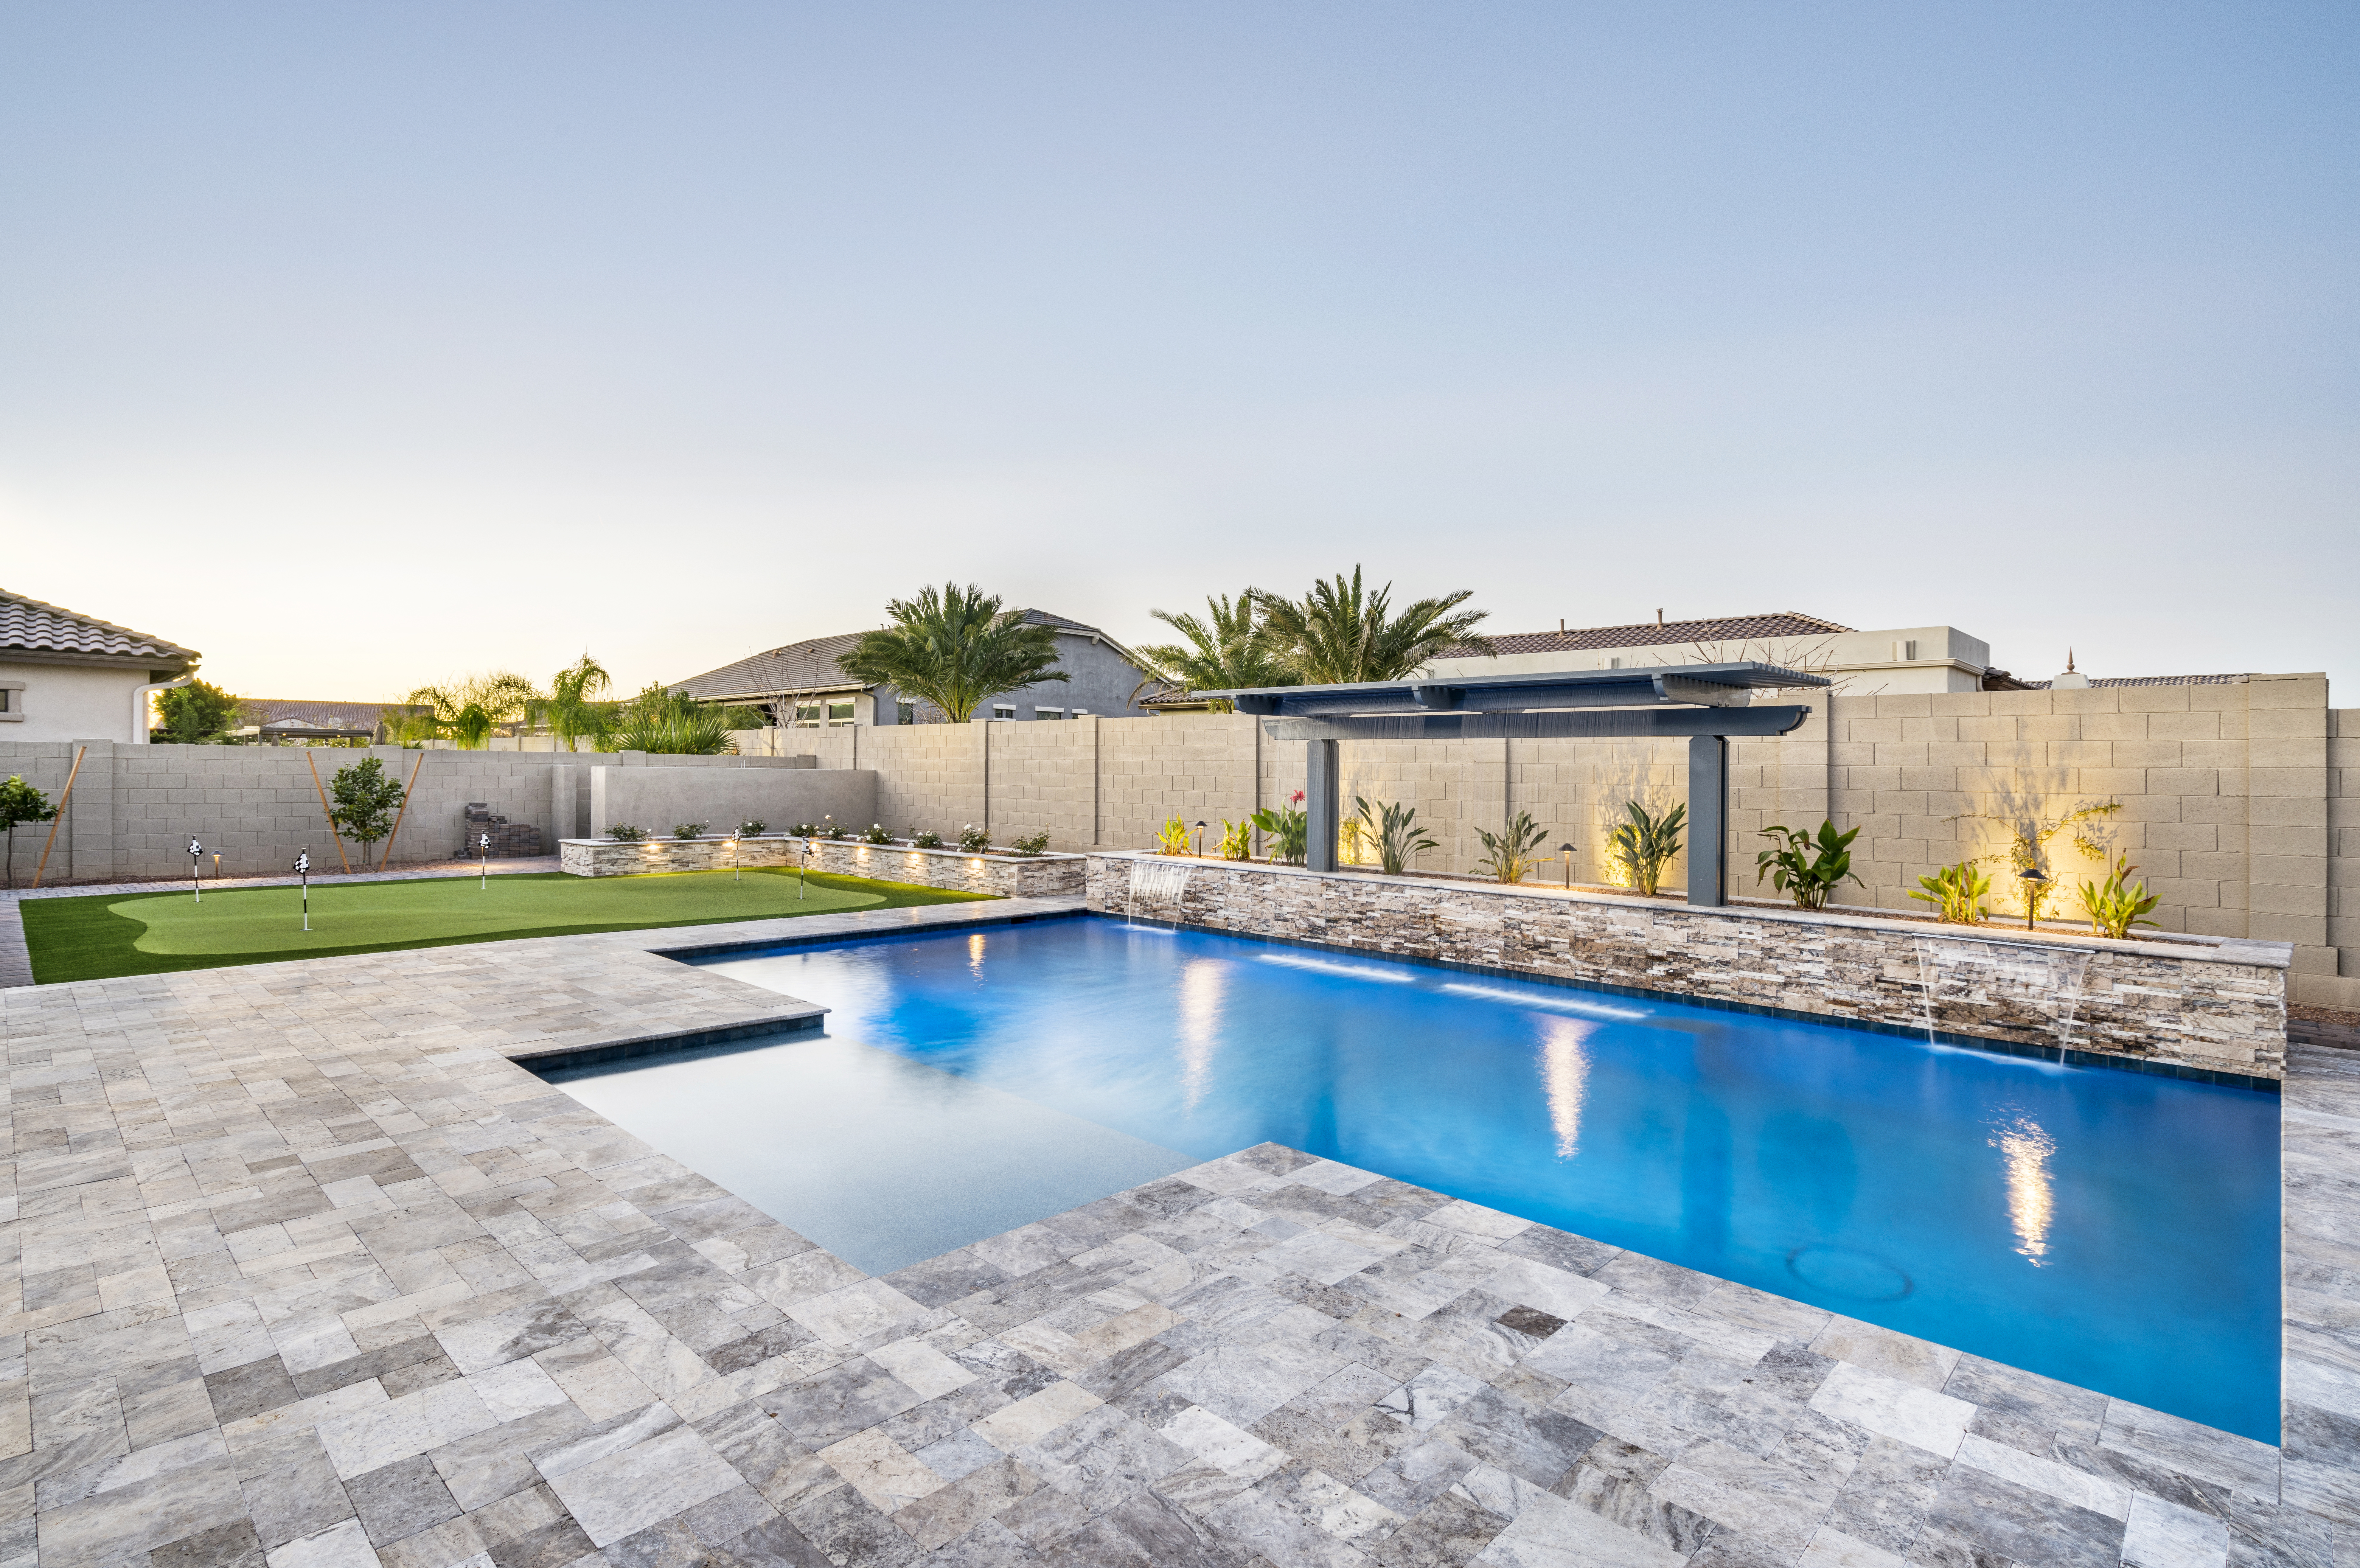 Tips for Budgeting and Financing Your Arizona Pool Project